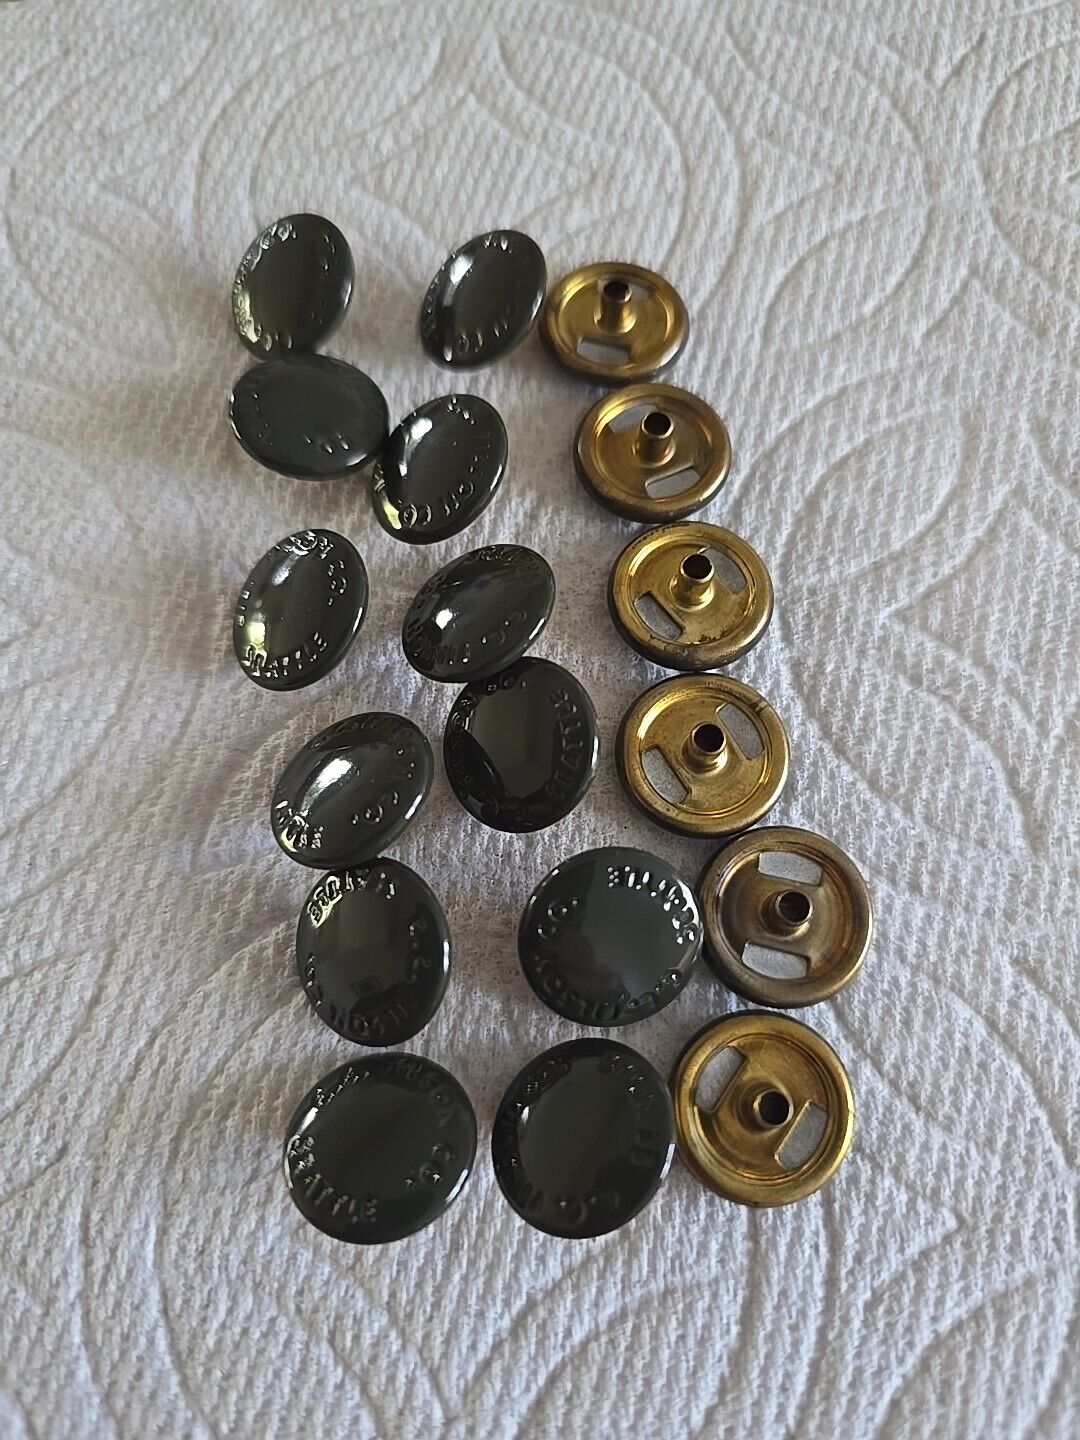 New Vintage C. C. Filson Seattle Sewing Snap Fasteners BROWN Lot Of 18 Each.